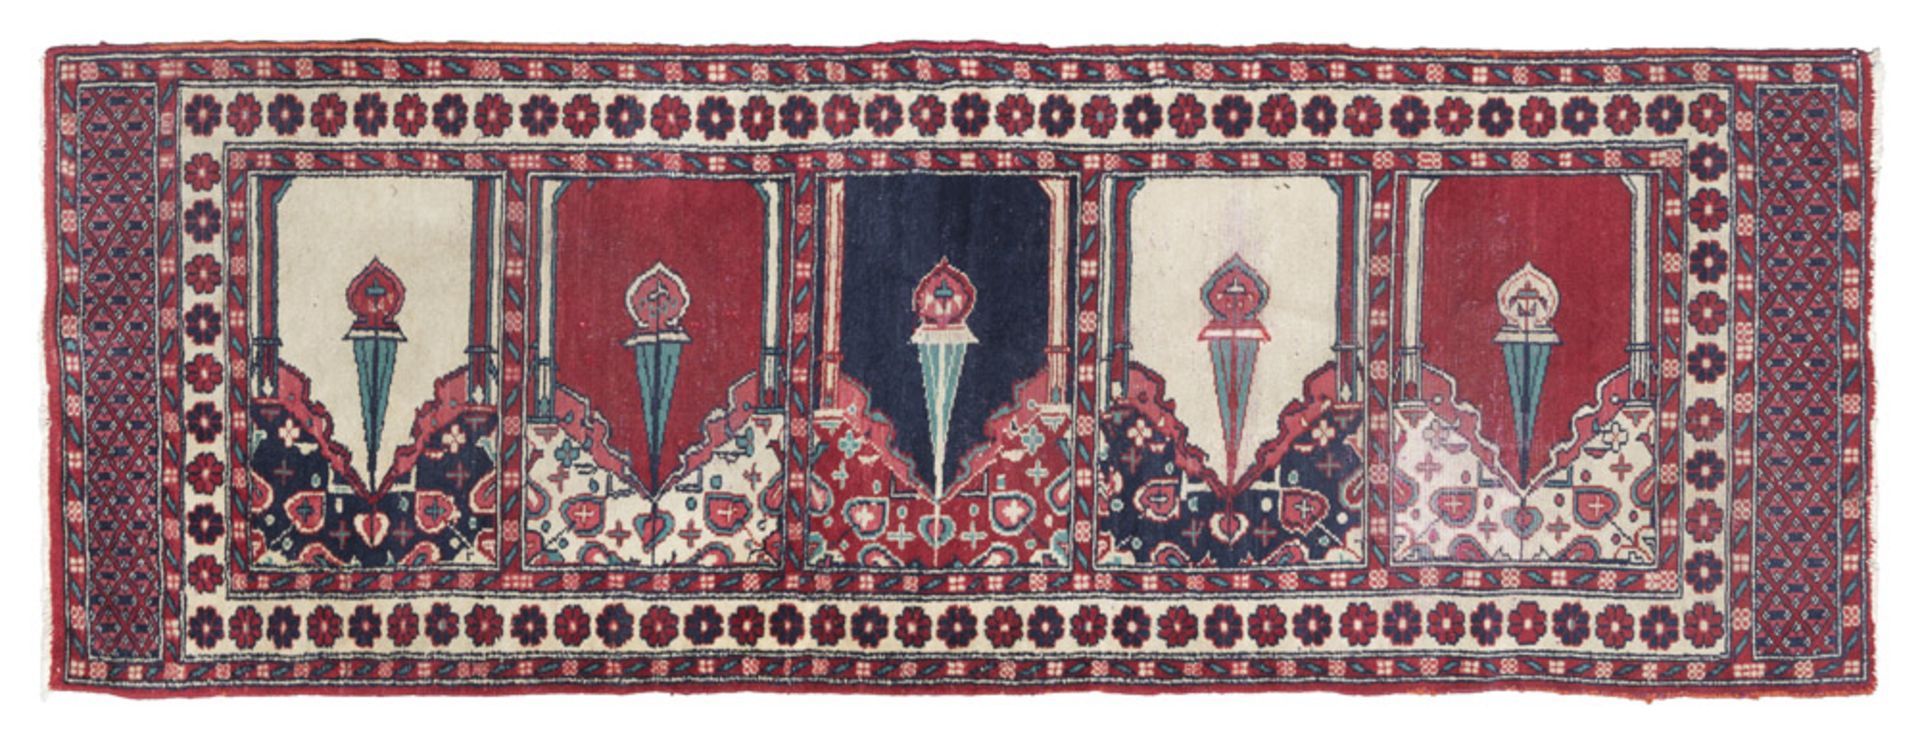 CARPET PAKISTAN, EARLY 20TH CENTURY to series of Mirhab with lights on grounds motley, in the center